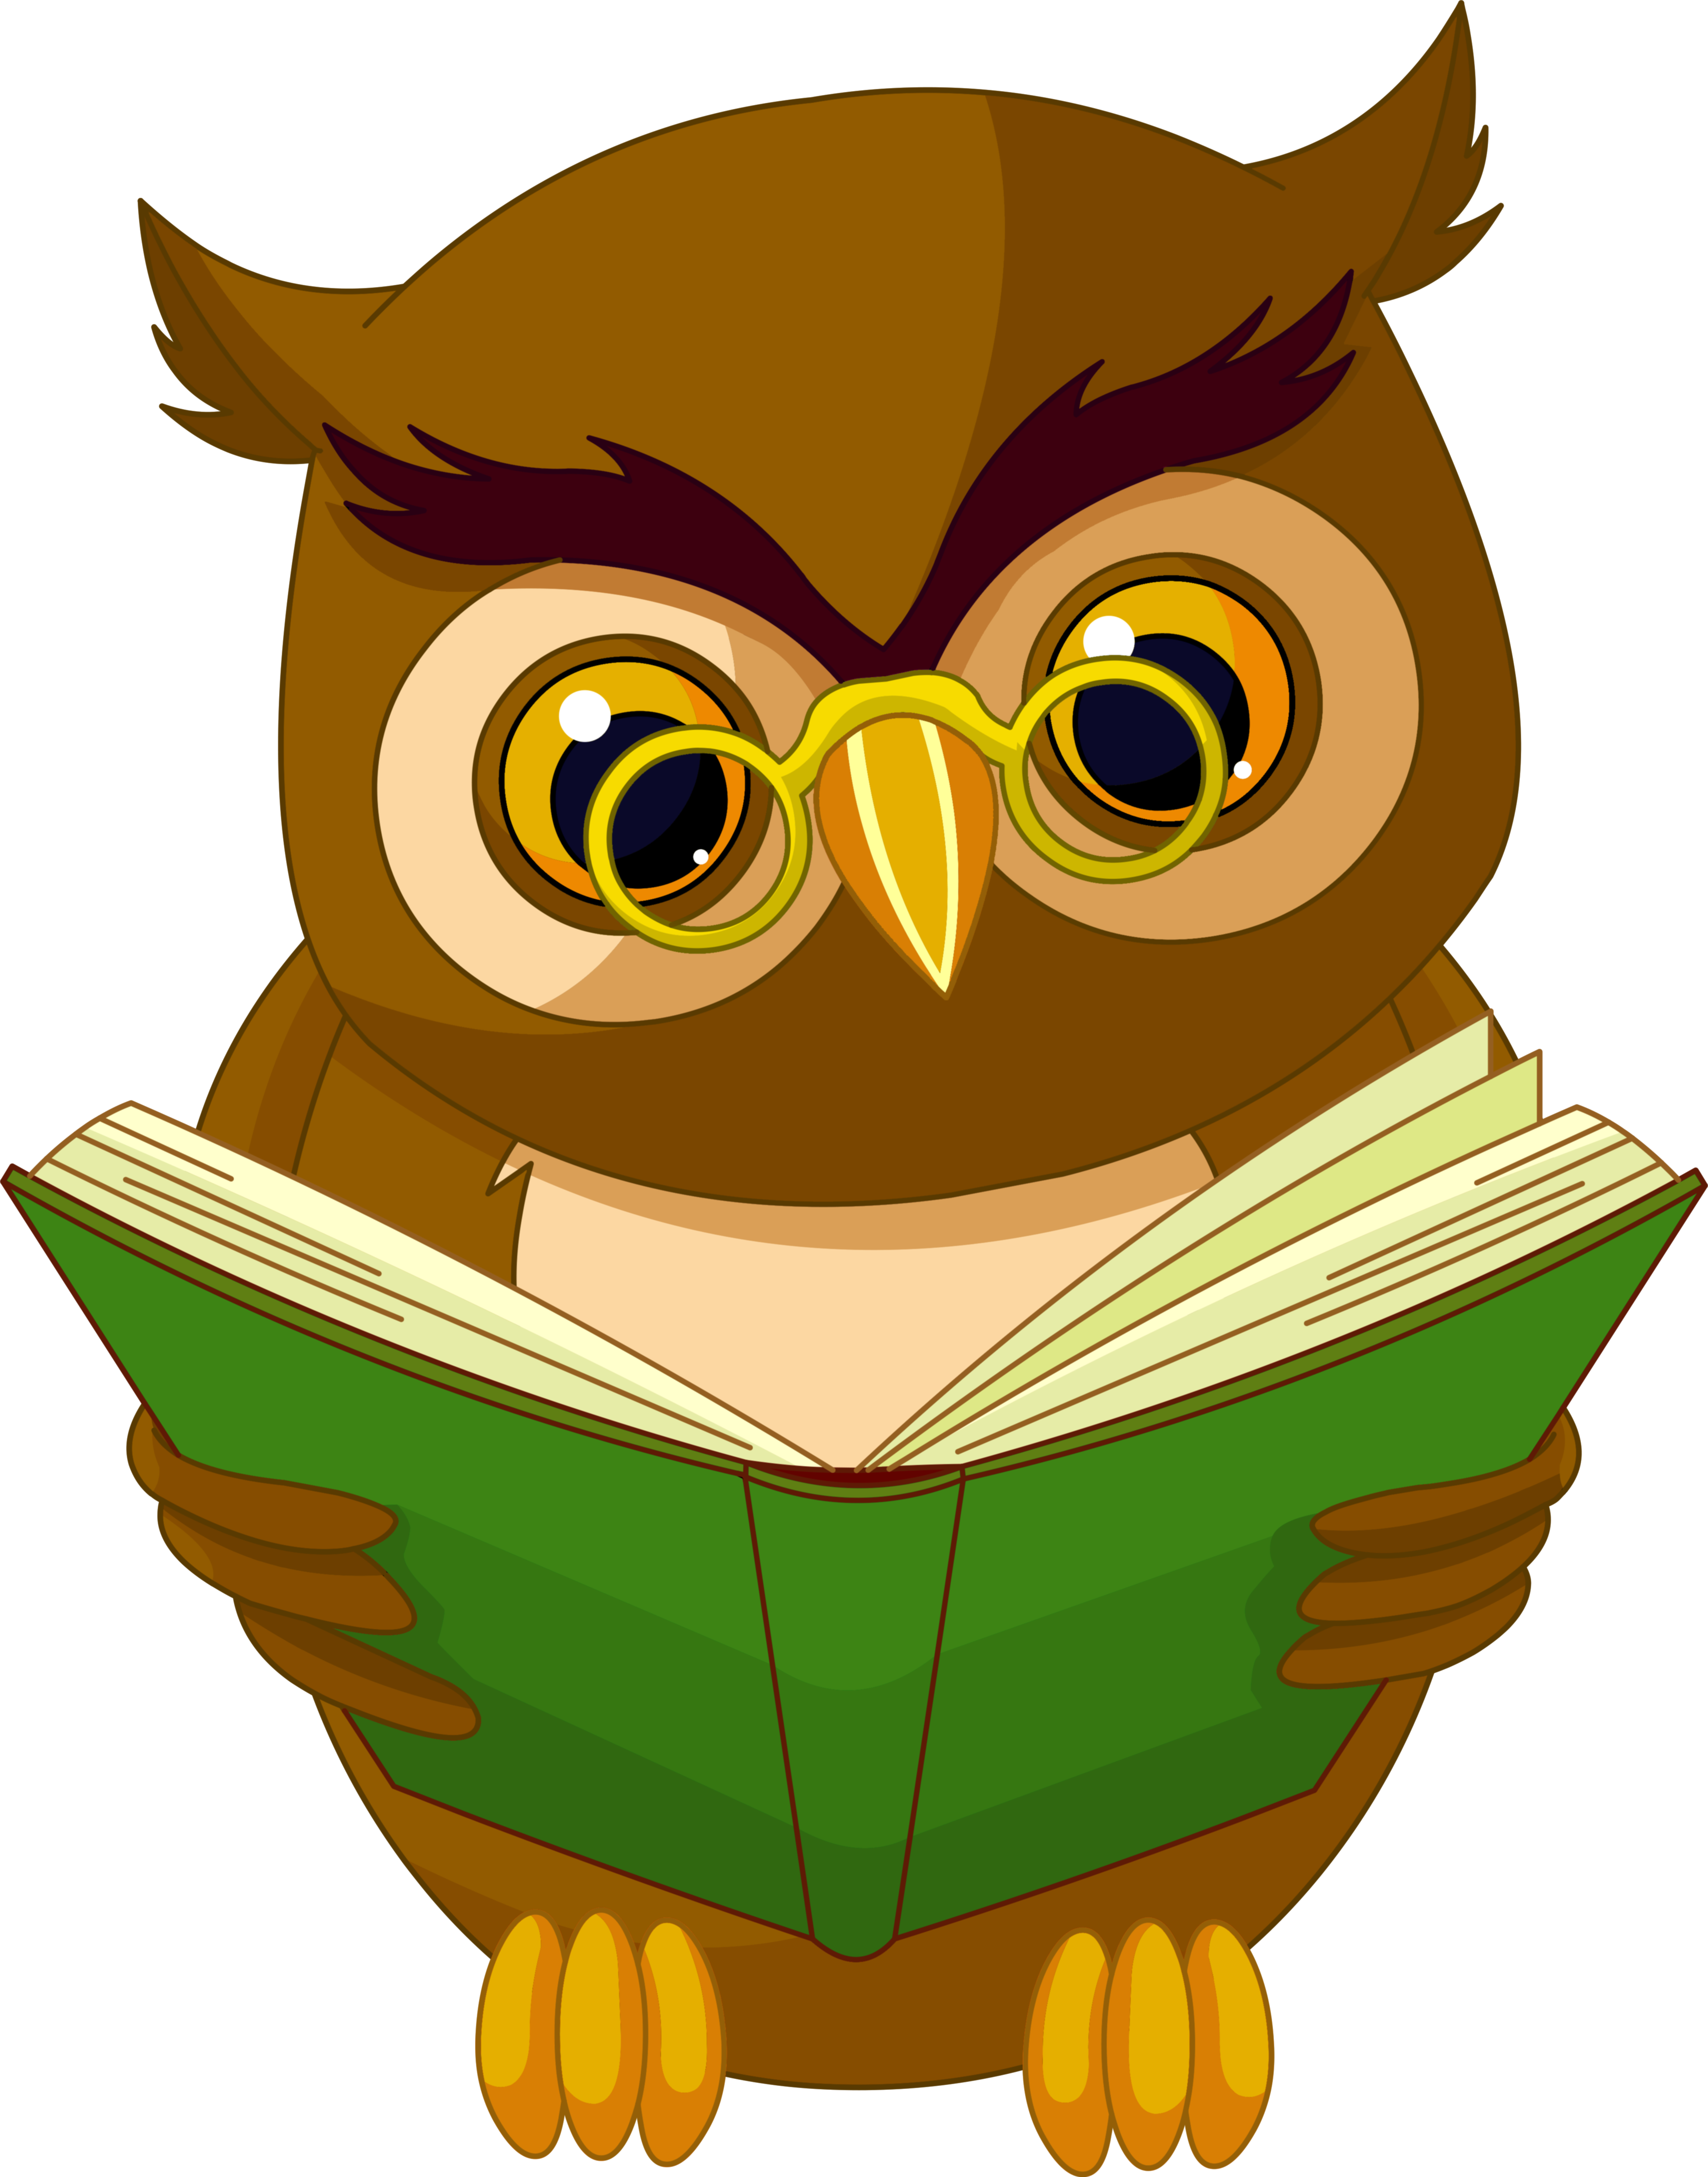 Free Owl And Book Clip Art - ClipArt Best